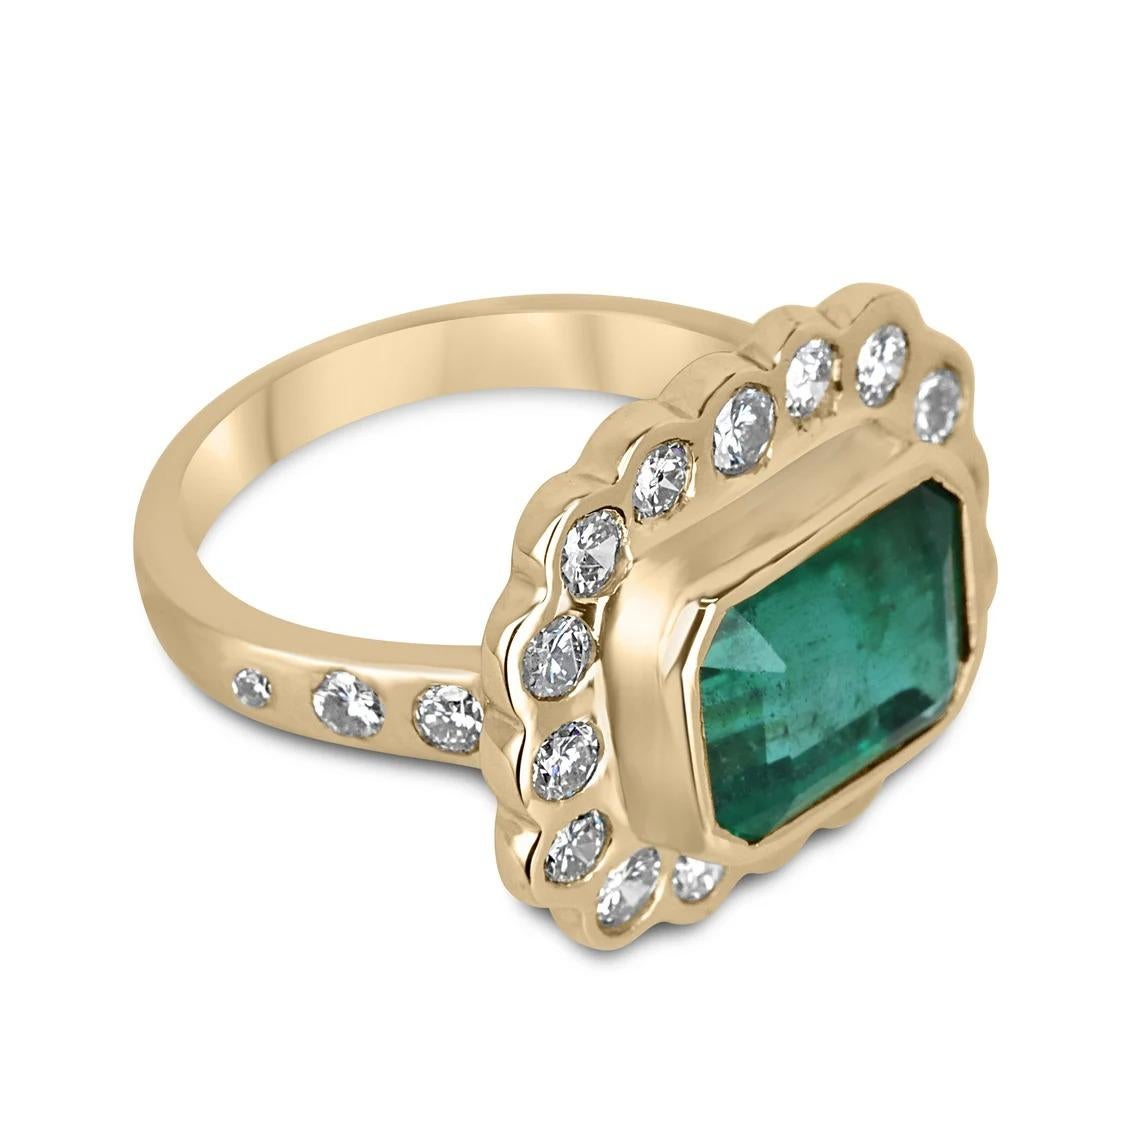 Behold this remarkable emerald cut emerald, sourced from the origin of Zambia, that exudes the finest quality. The emerald's vivacious alpine, rich, green color is full of life and luster, and its AAA quality is evident. Carefully bezel set in solid